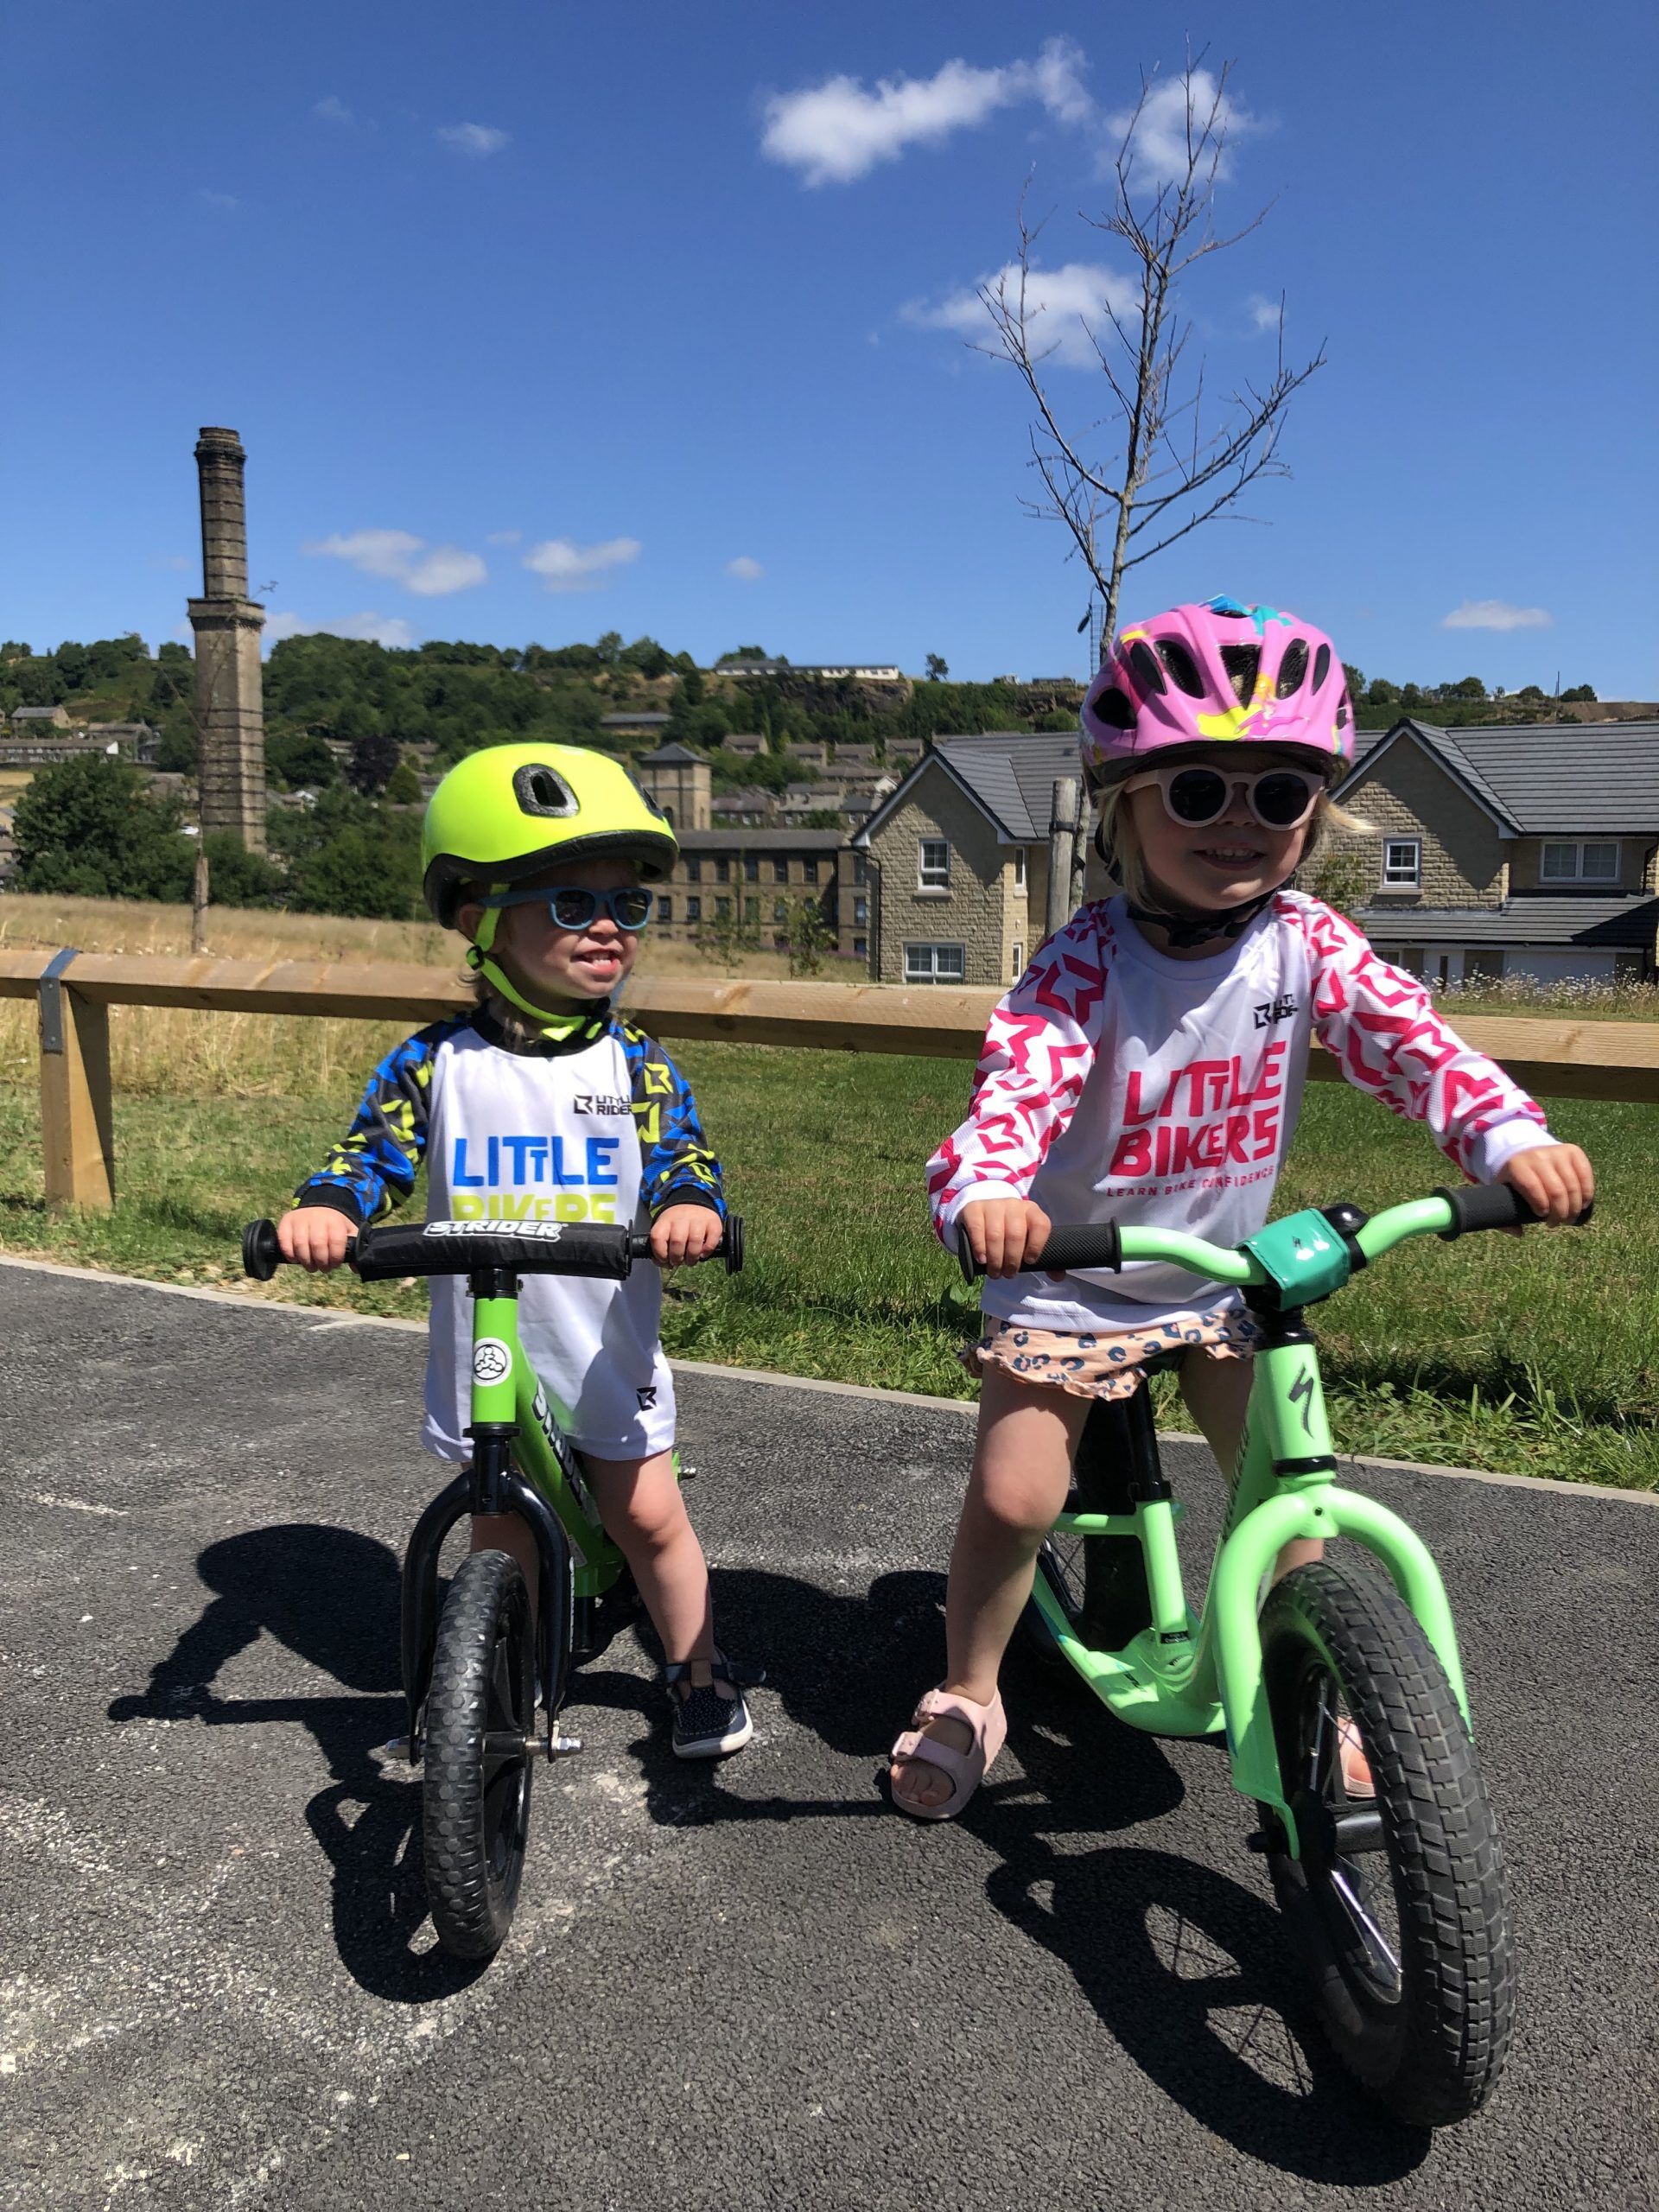 A boy and a girl, smiling on their balance bikes.